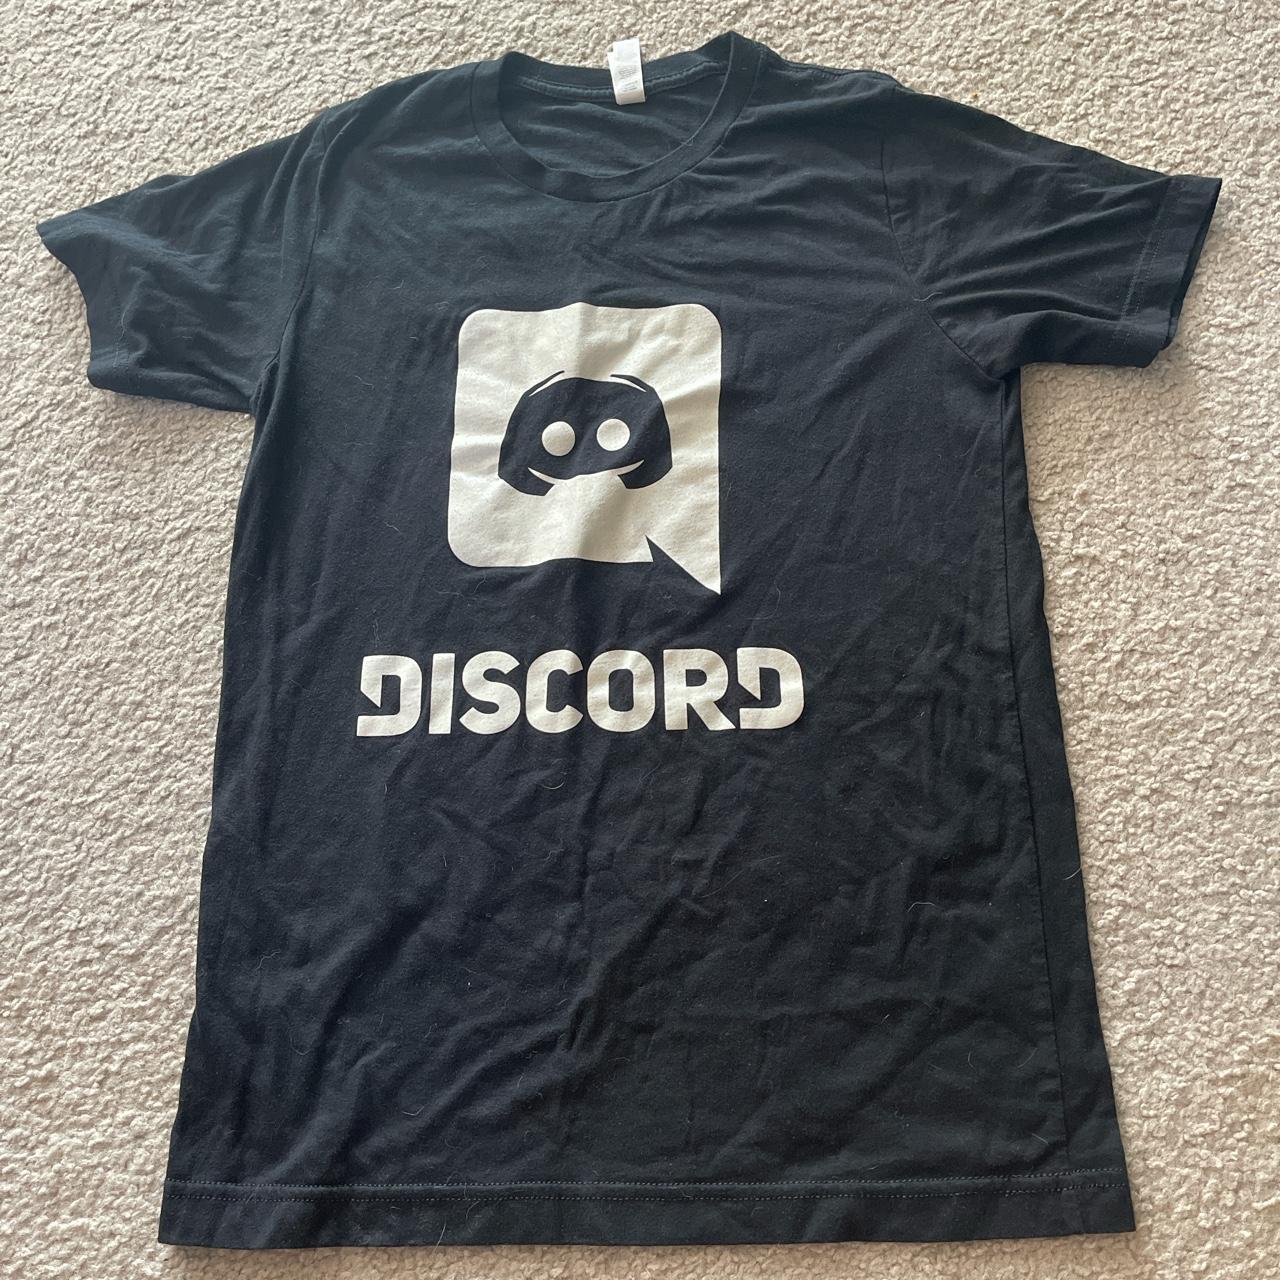 Discord T-Shirts for Sale